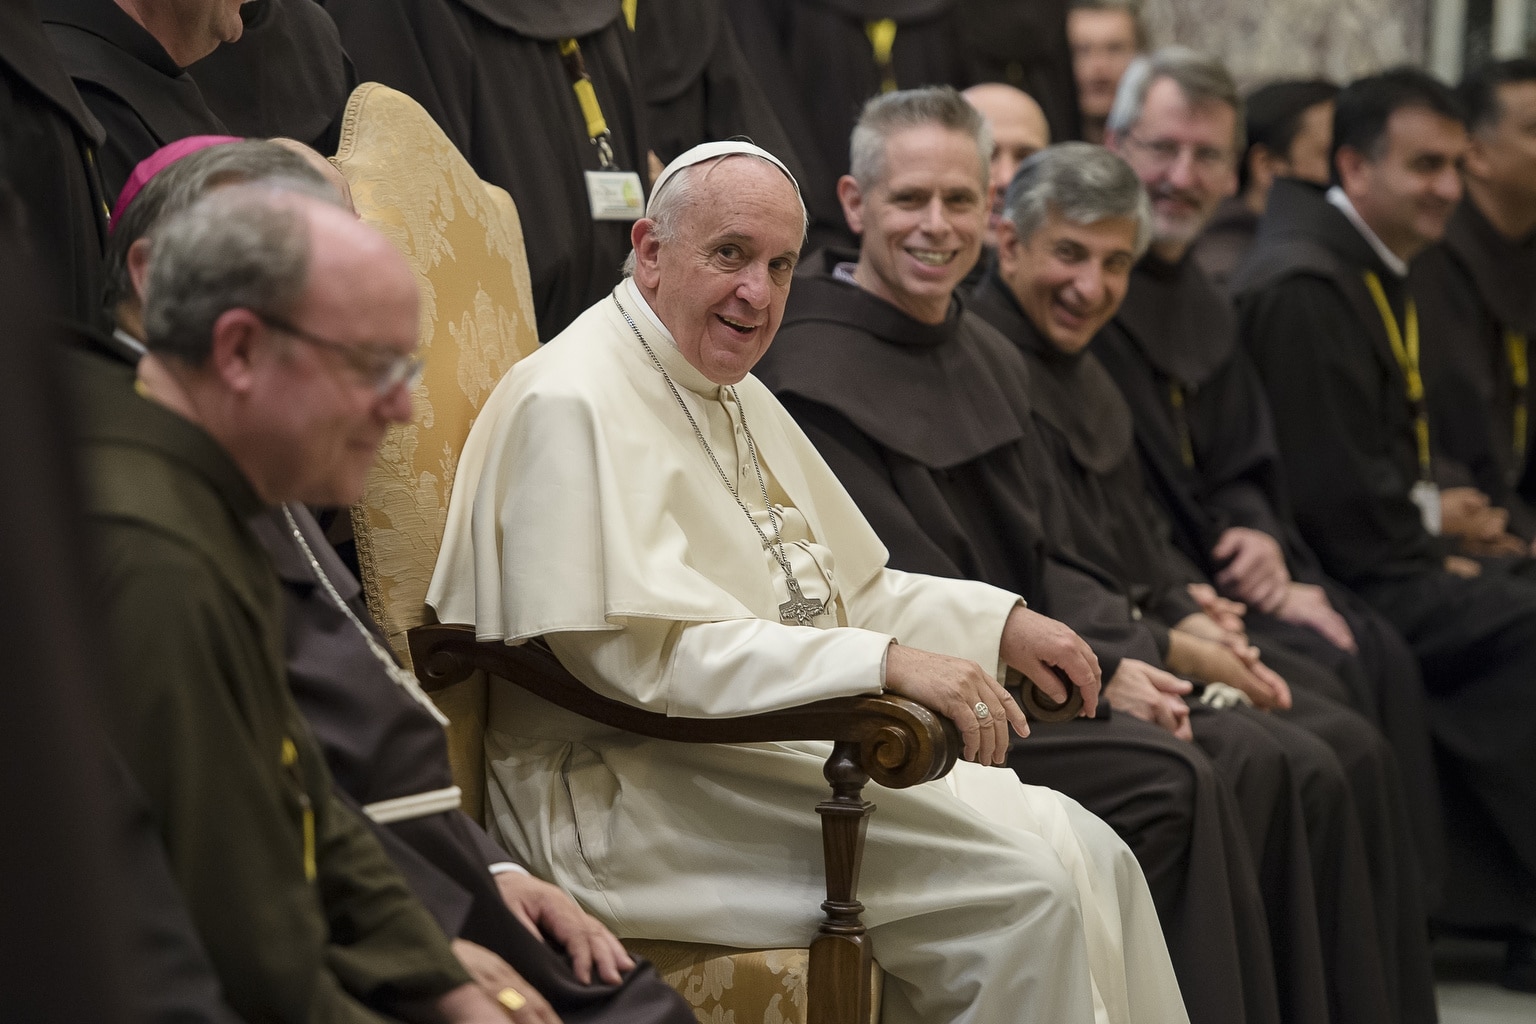 Pope Francis meets with delegates to the general chapter of the Order of Friars Minor during an audience with 200 Franciscan leaders at the Vatican May 26. U.S. Franciscan Father Michael Perry, who was re-elected head of the order May 21, is seated to the right of the pope. (CNS photo/L'Osservatore Romano) See POPE-FRANCISCANS May 26, 2015.